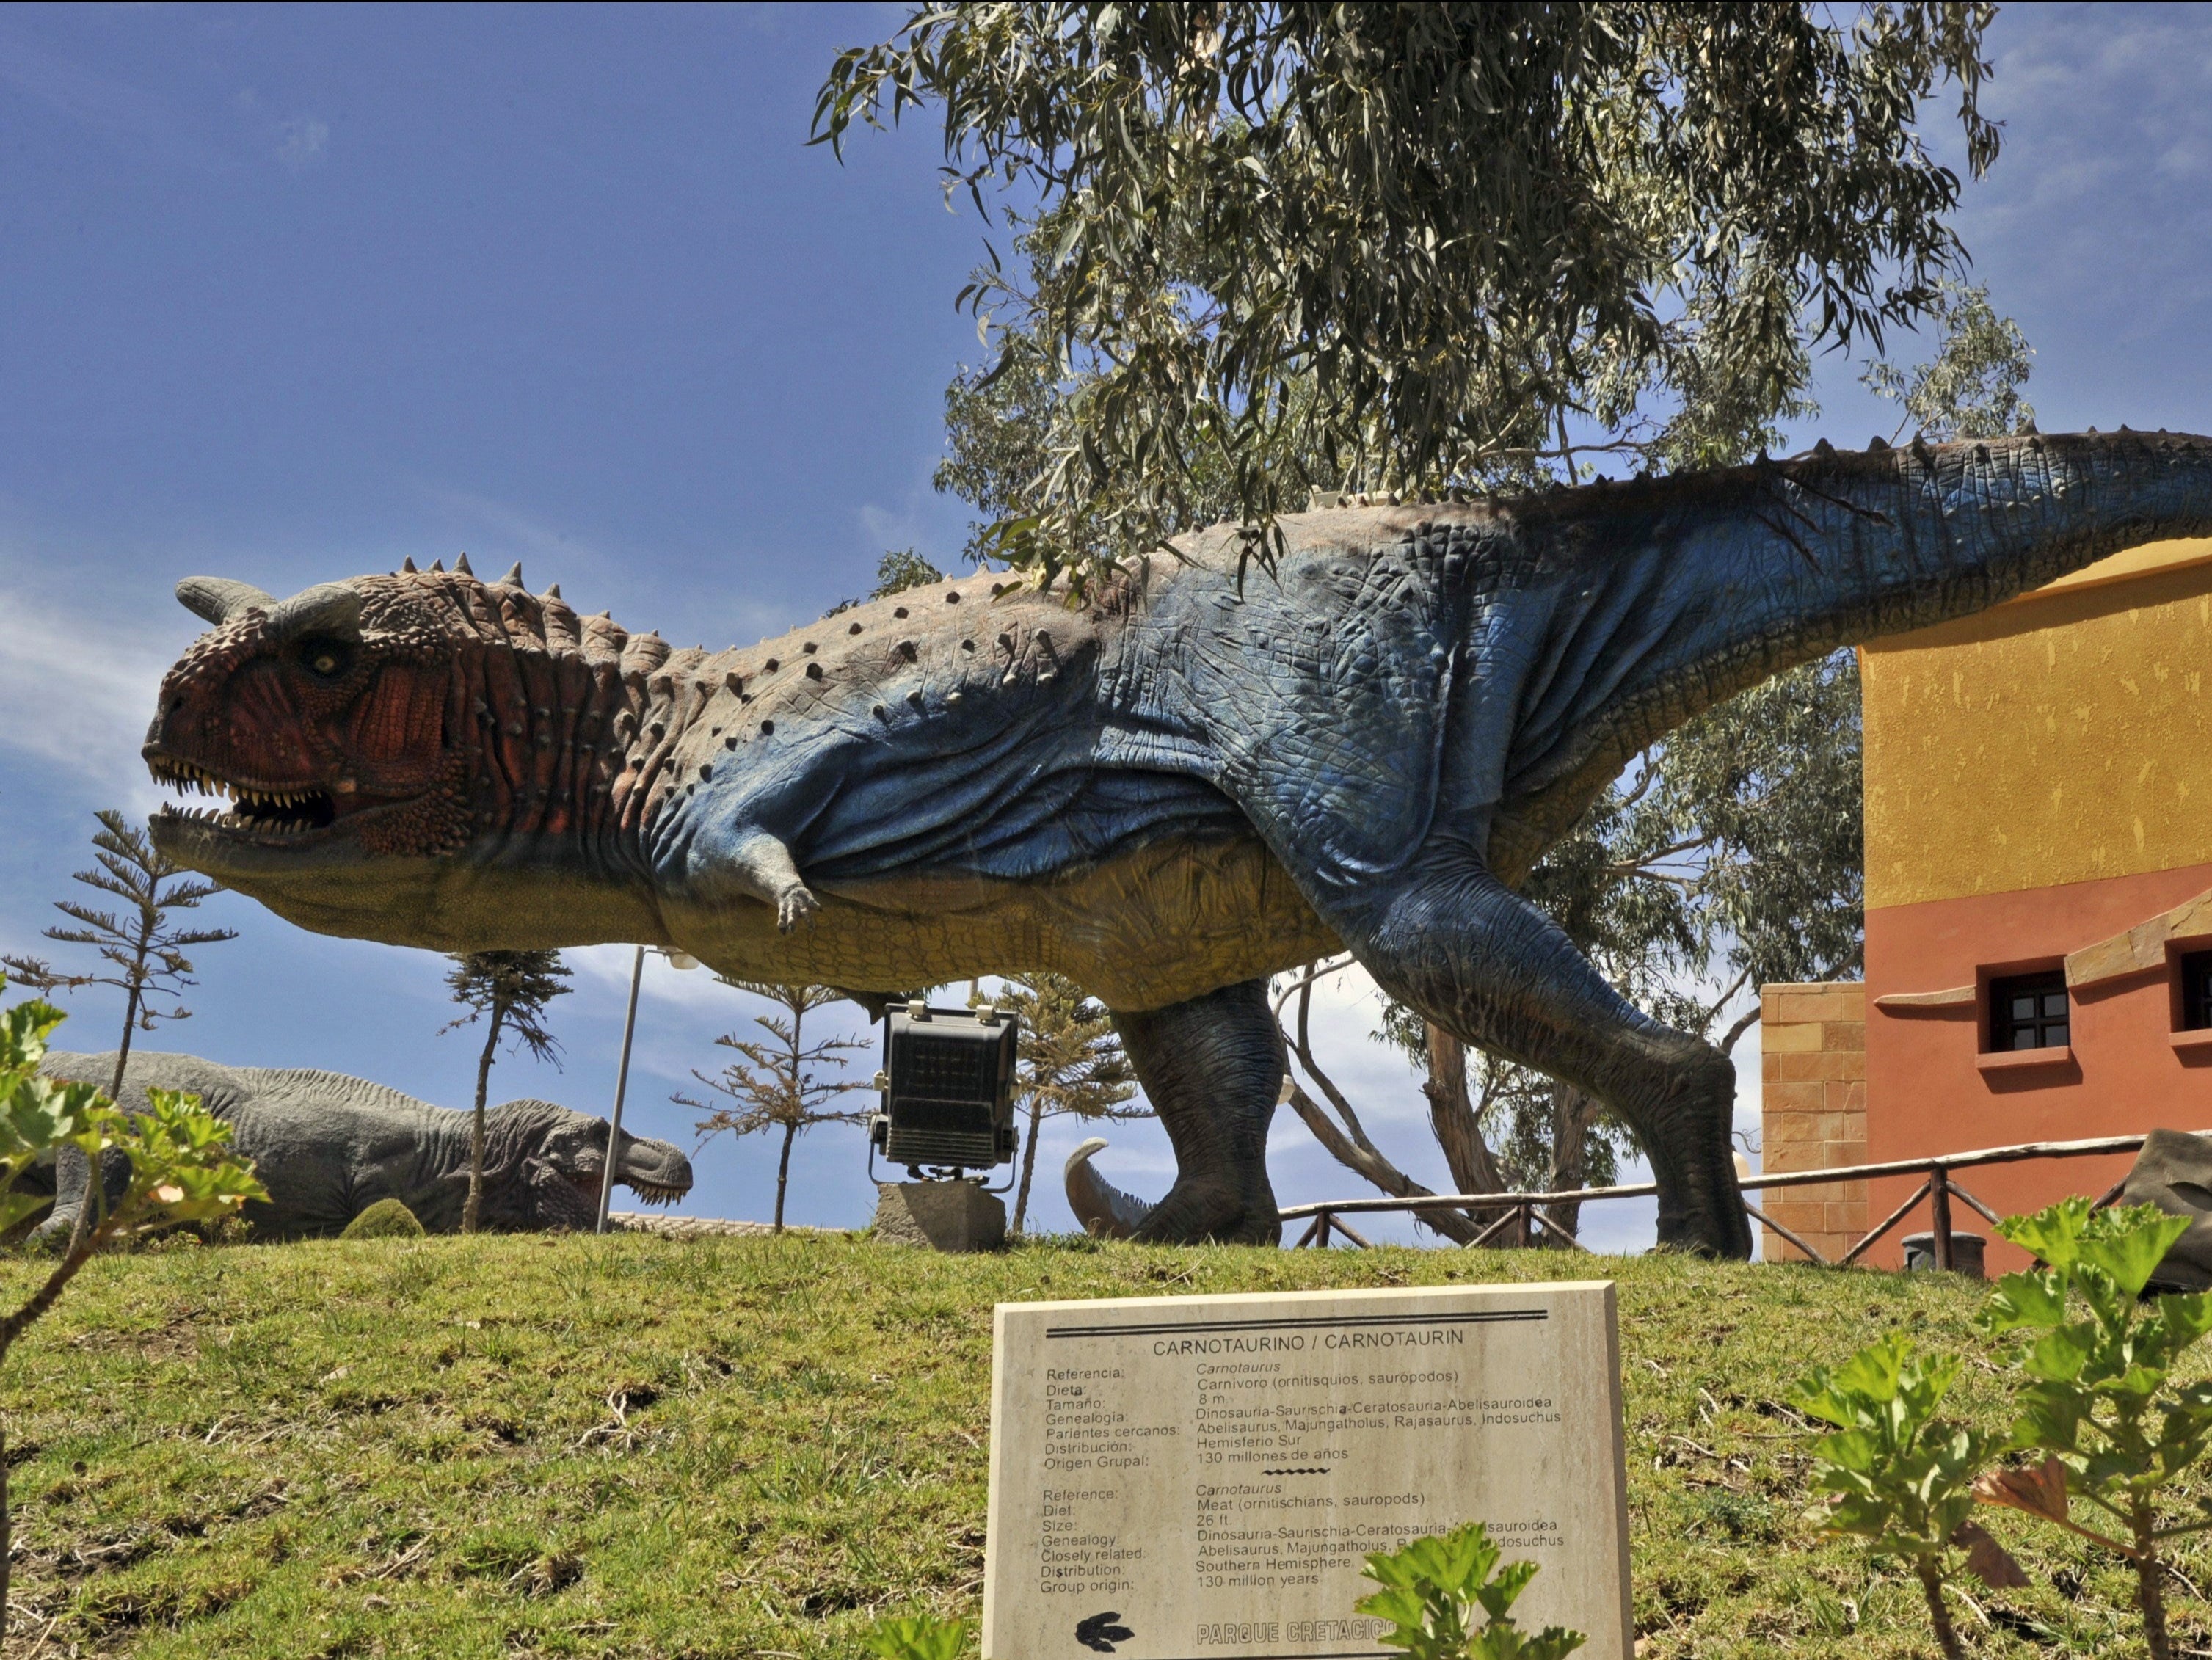 View of a Carnotaurus replica on dispaly at the Cretaceous Park in Cal Orcko hill in Sucre